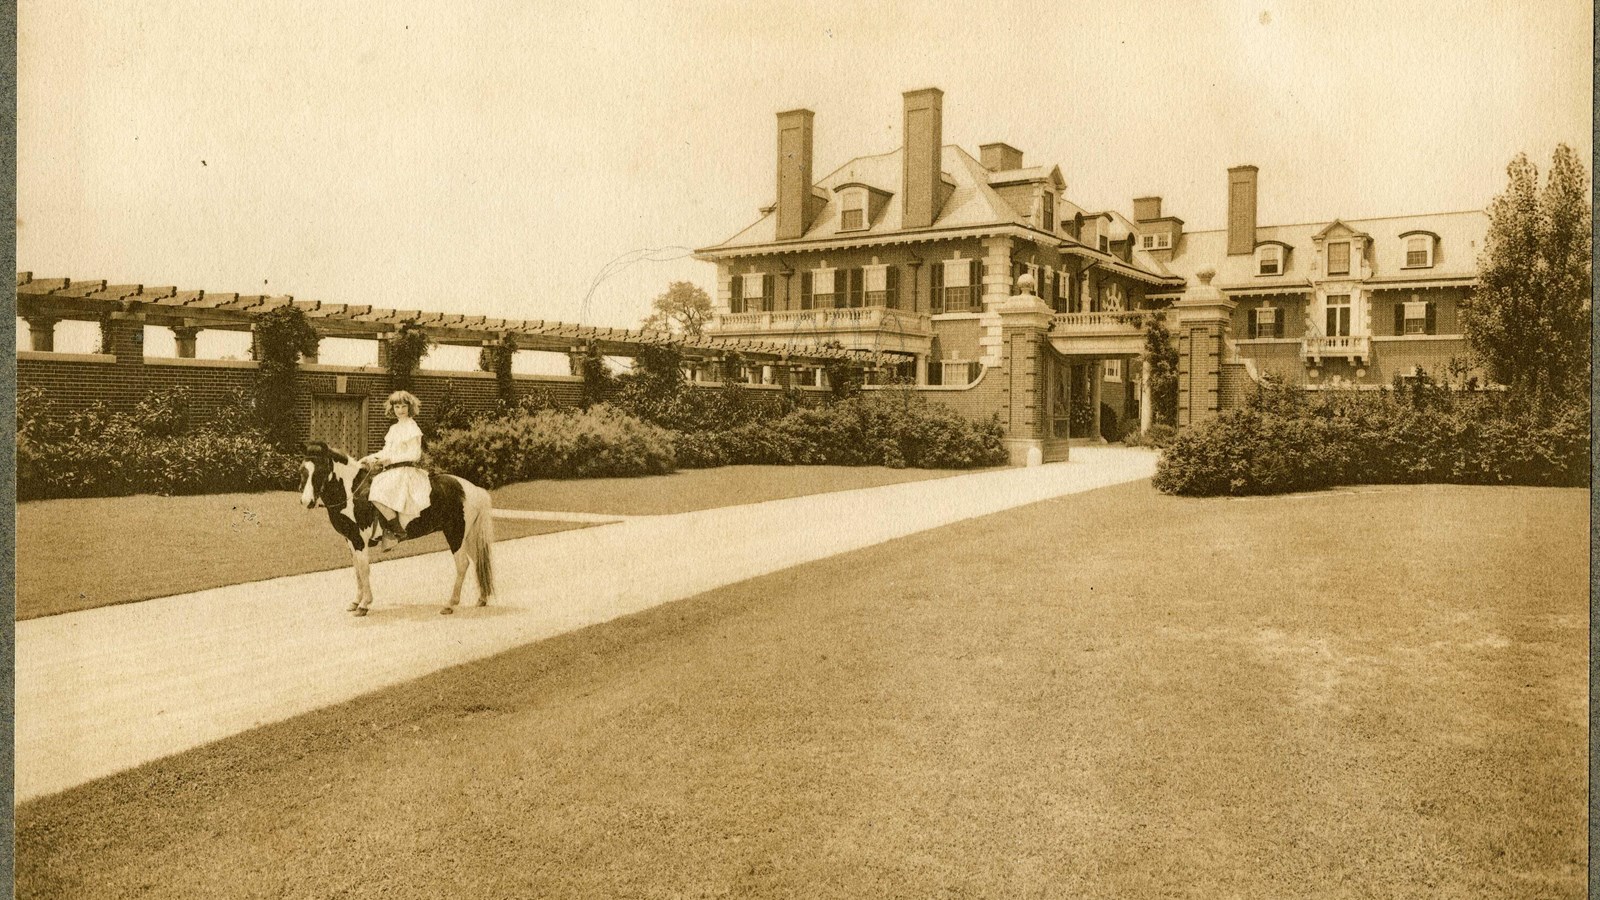 Black and white of flat path with girl riding horse on it, grass on both sides and large home behind